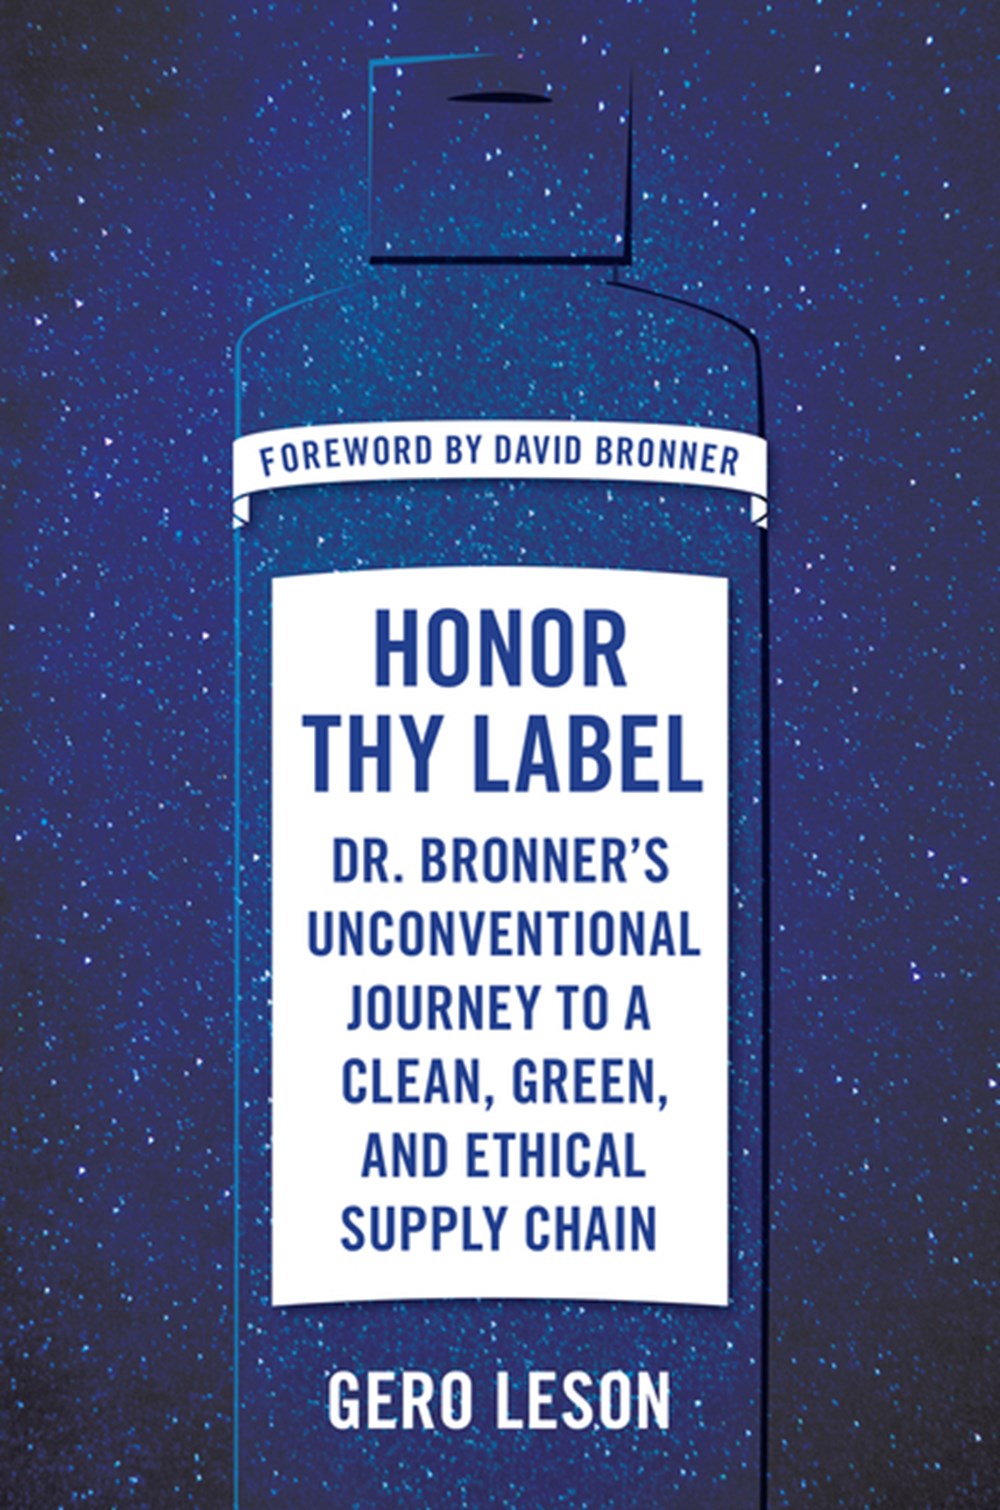 Honor Thy Label Dr. Bronner's Unconventional Journey to a Clean, Green, and Ethical Supply Chain